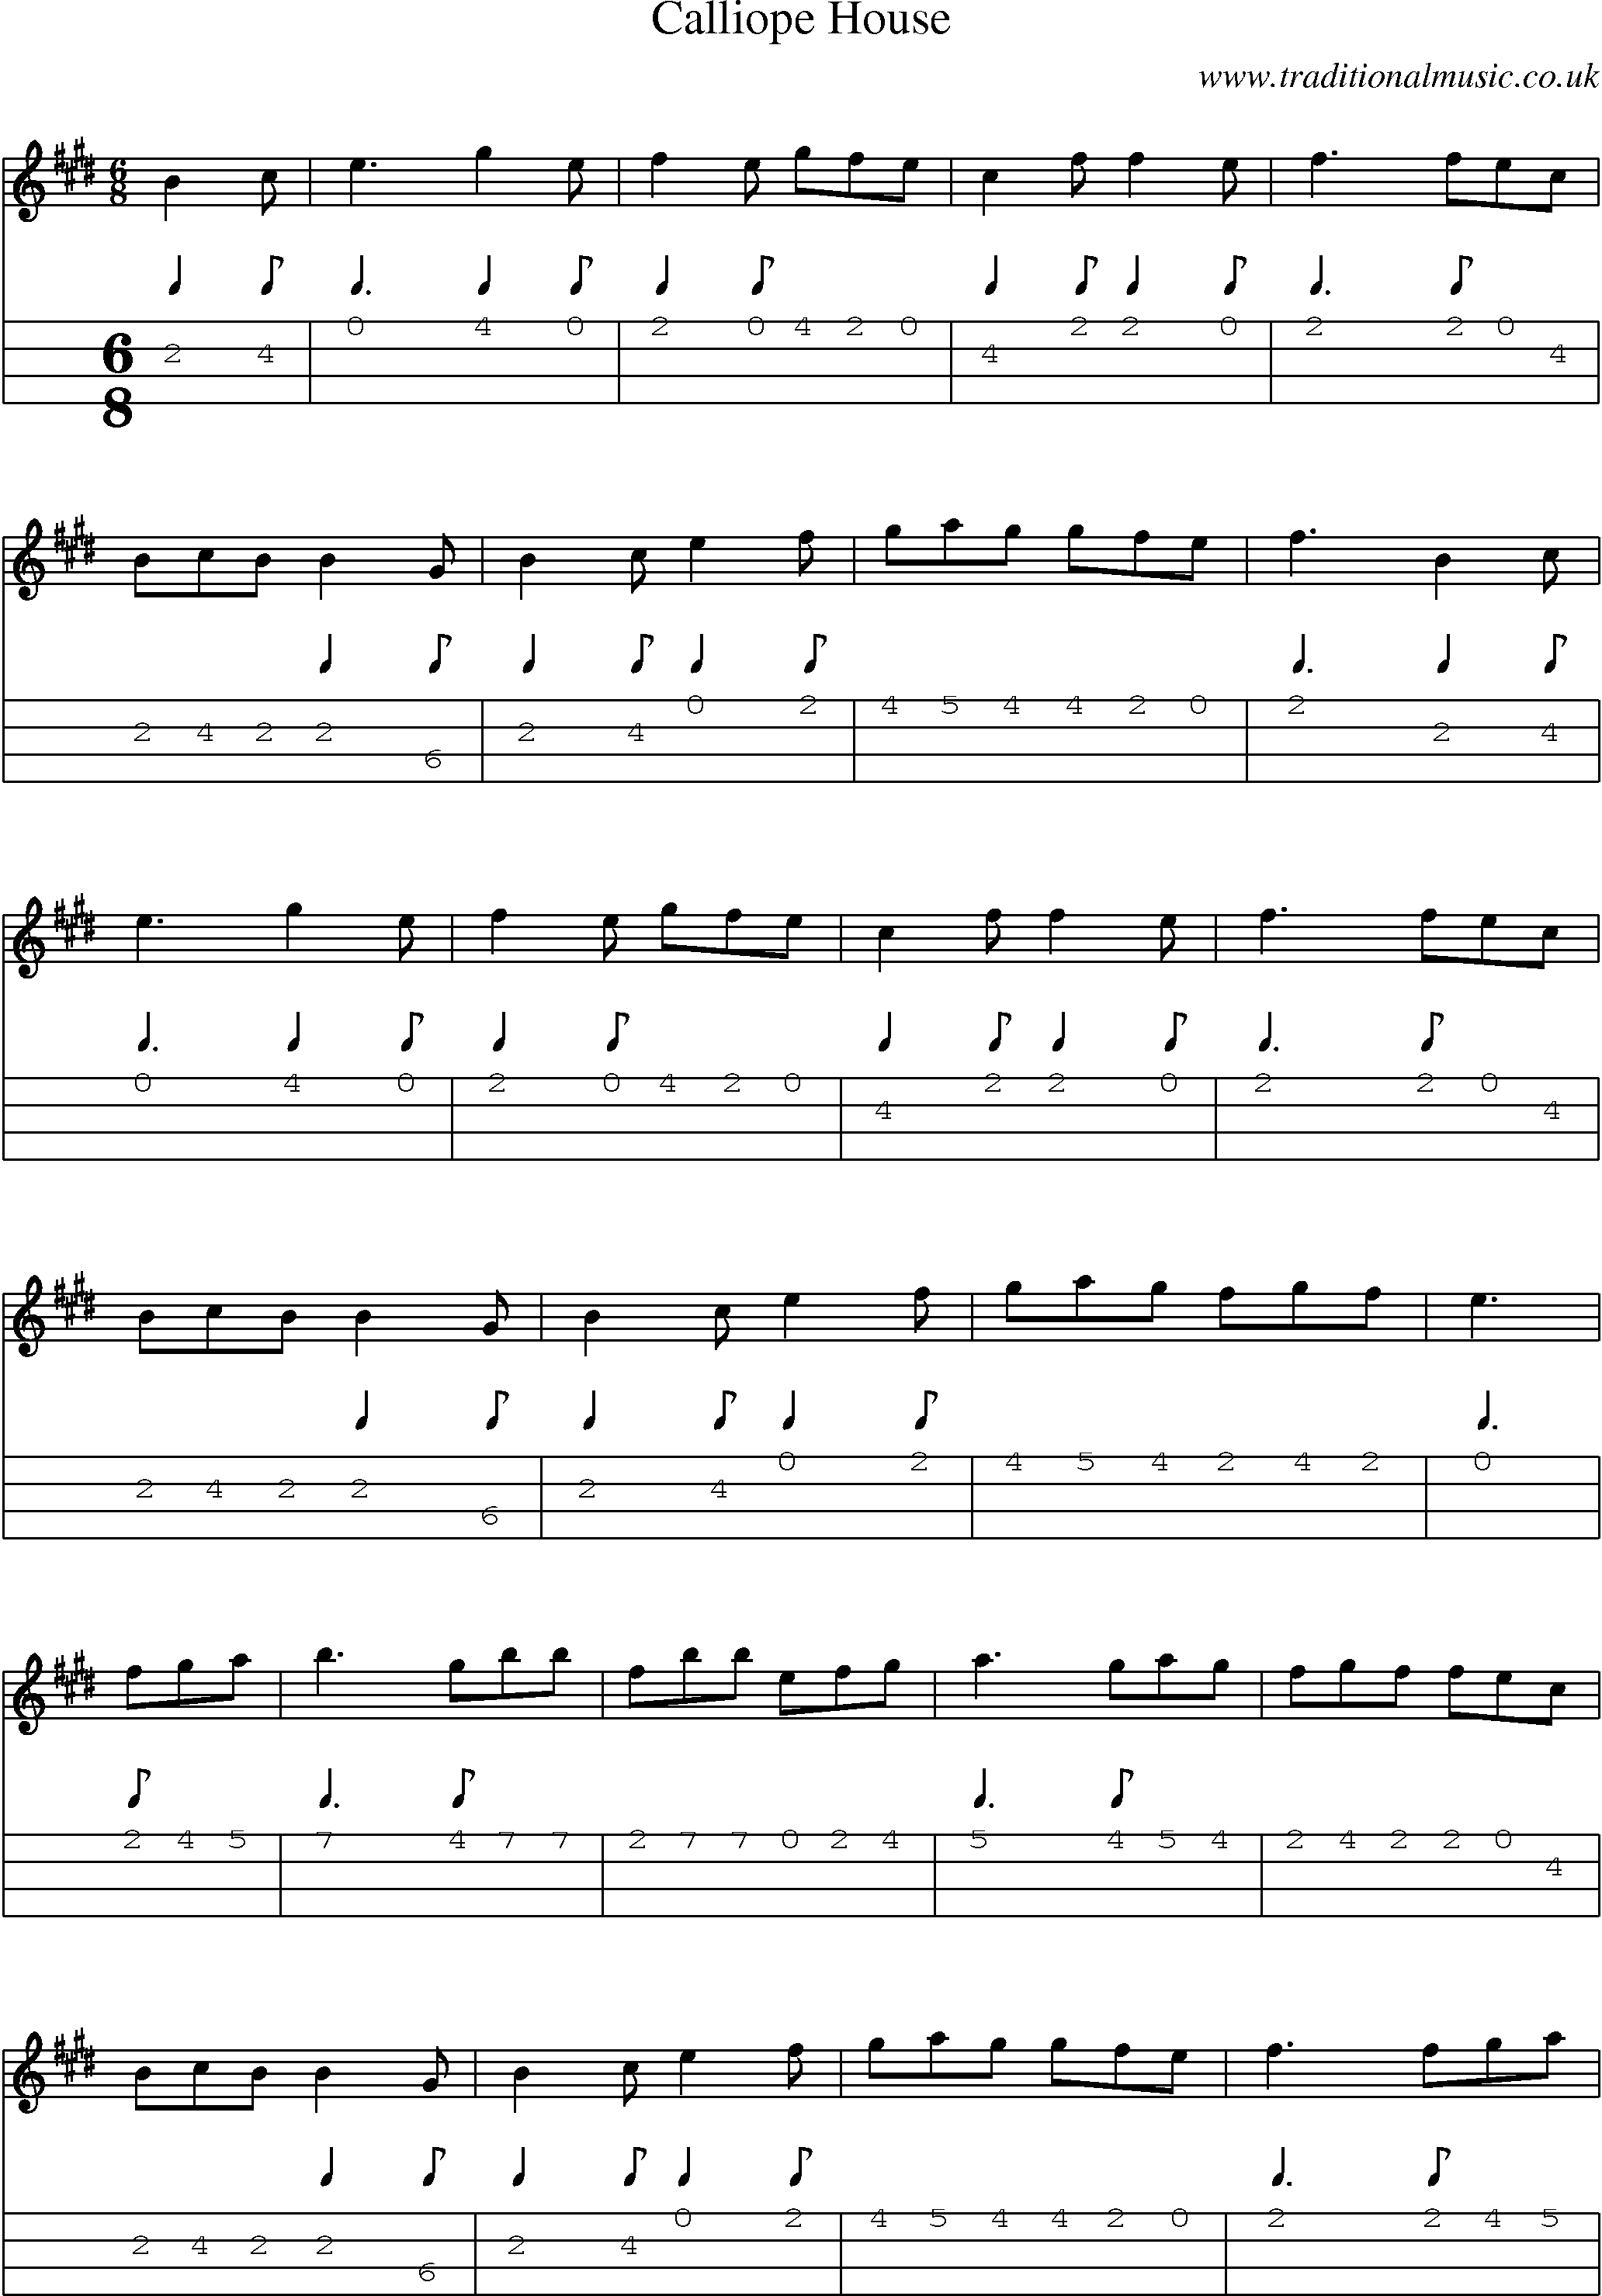 Music Score and Mandolin Tabs for Calliope House